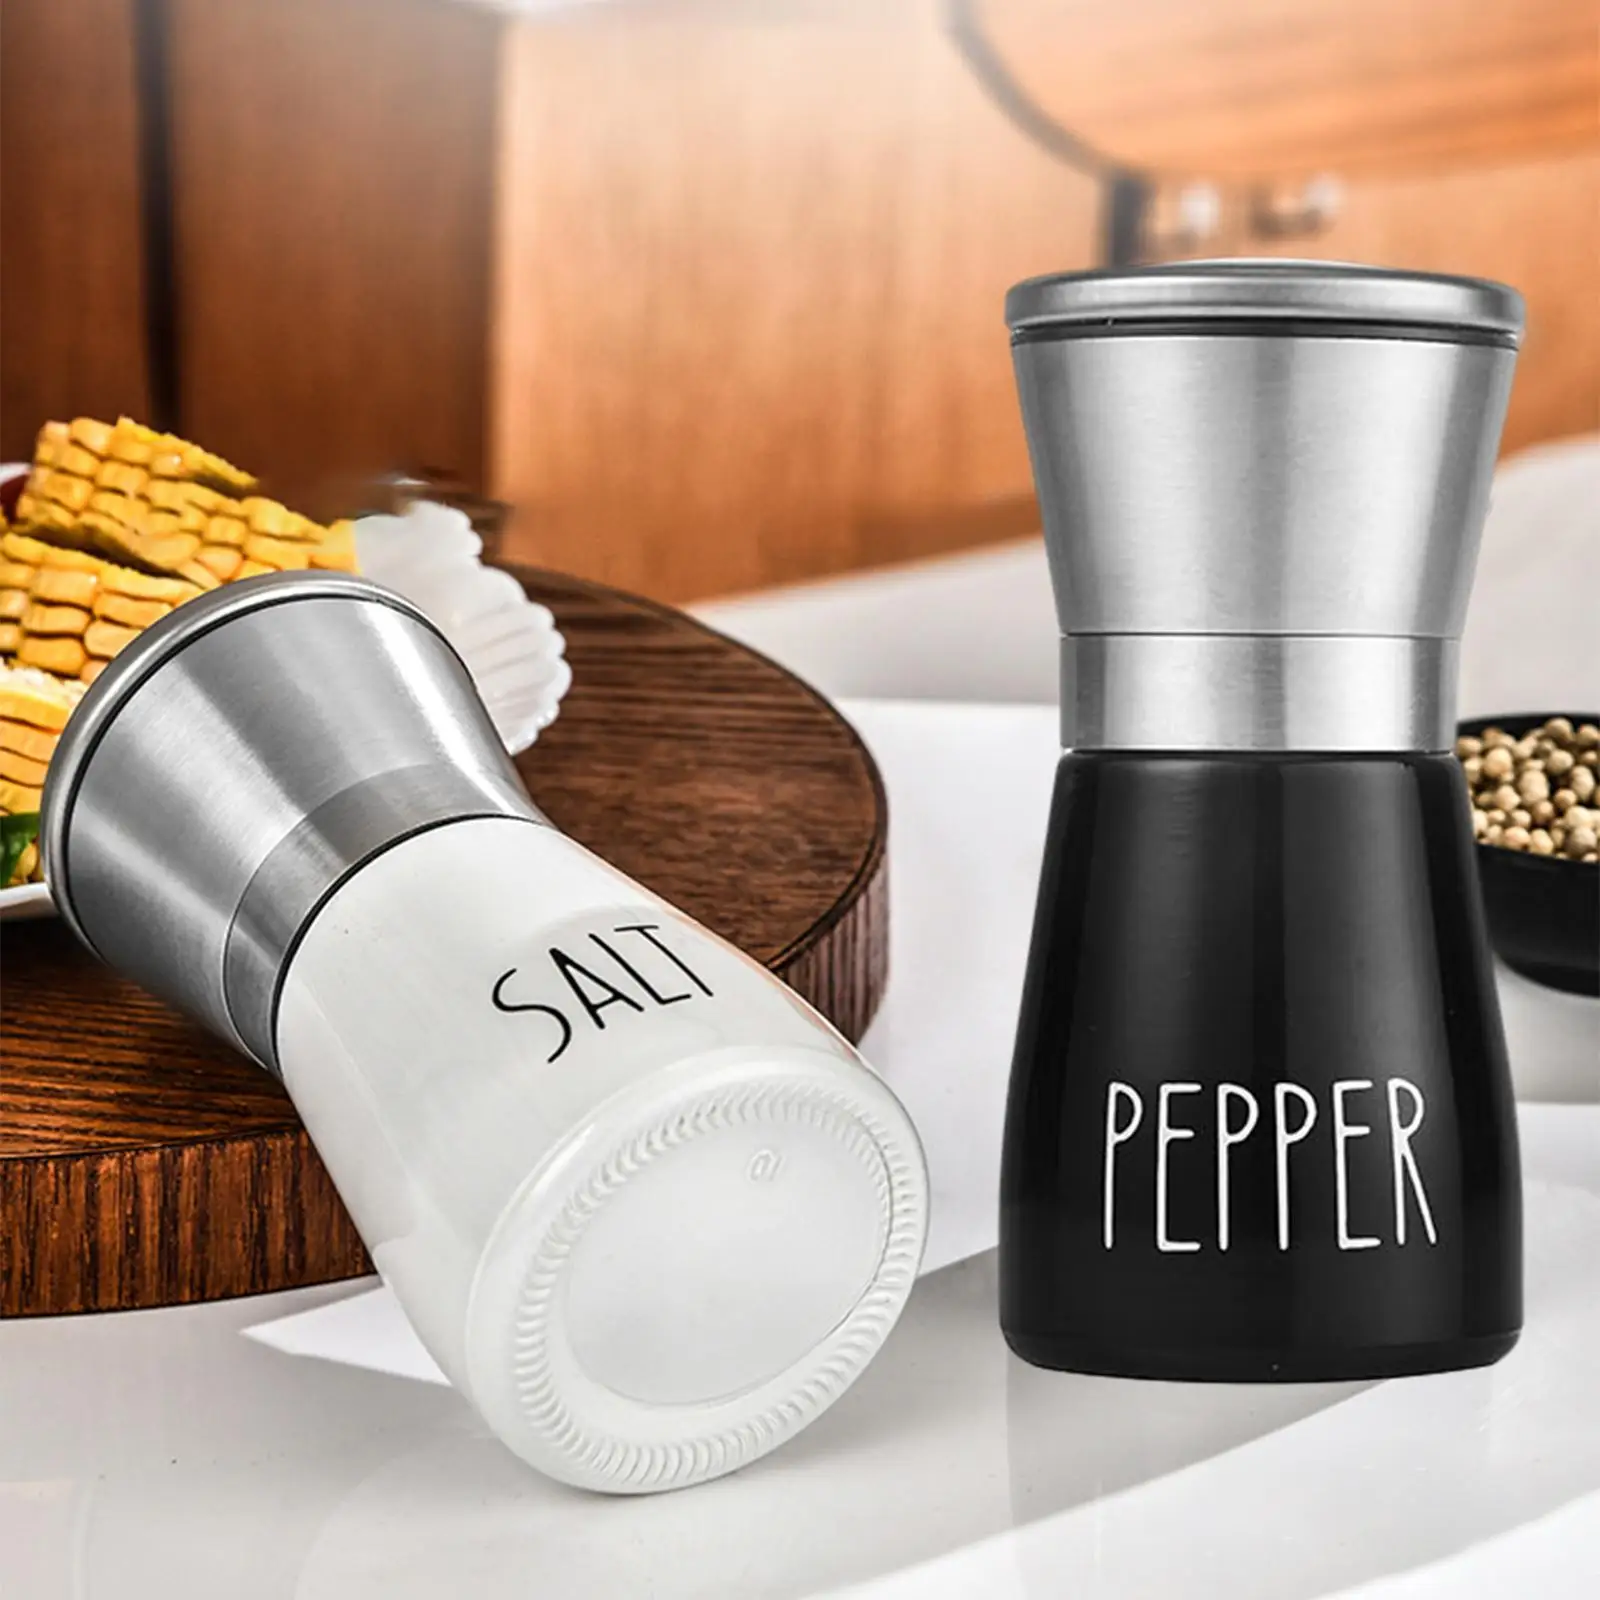 2 Pieces Refillable Salt Pepper Grinder Set, for Home Barbecue,Party and Every Meal Ceramic Blades with Dust Cover Kitchen Gift